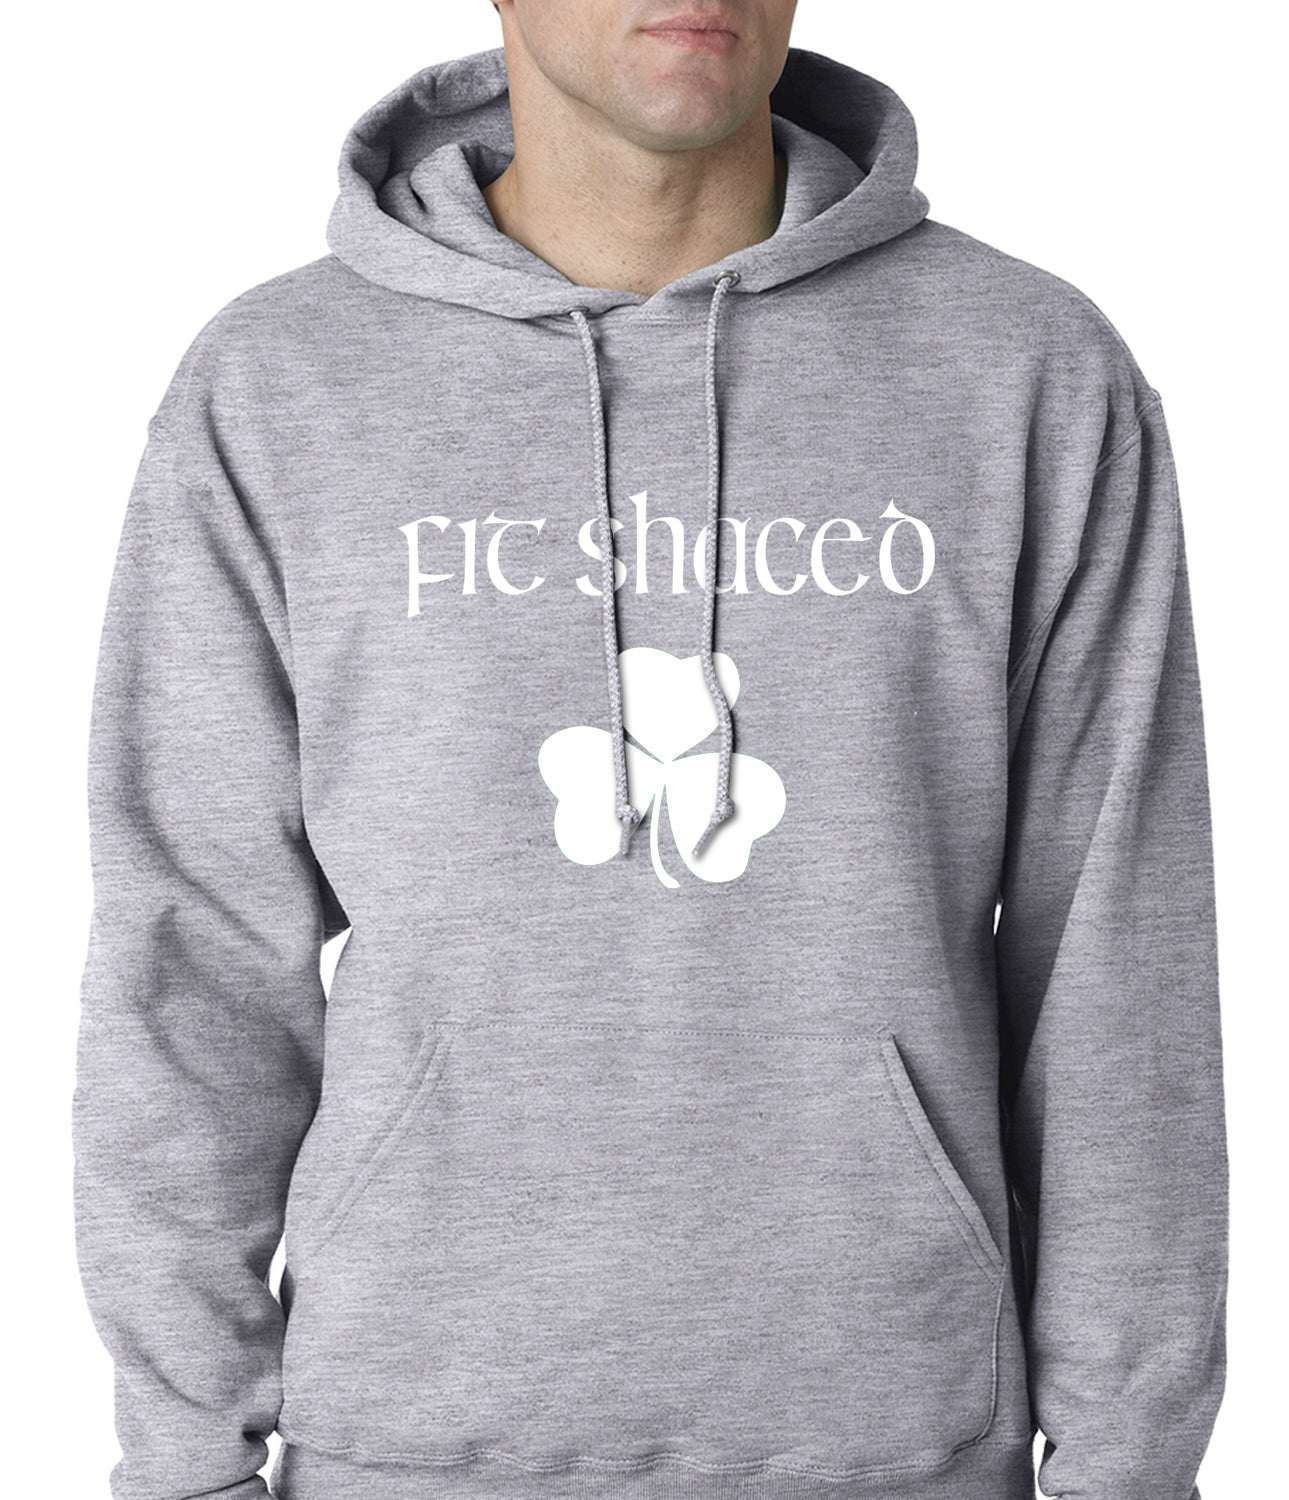 Fit Shaced (Shit Faced) St. Patricks Day Shamrock Drinking Adult Hoodie